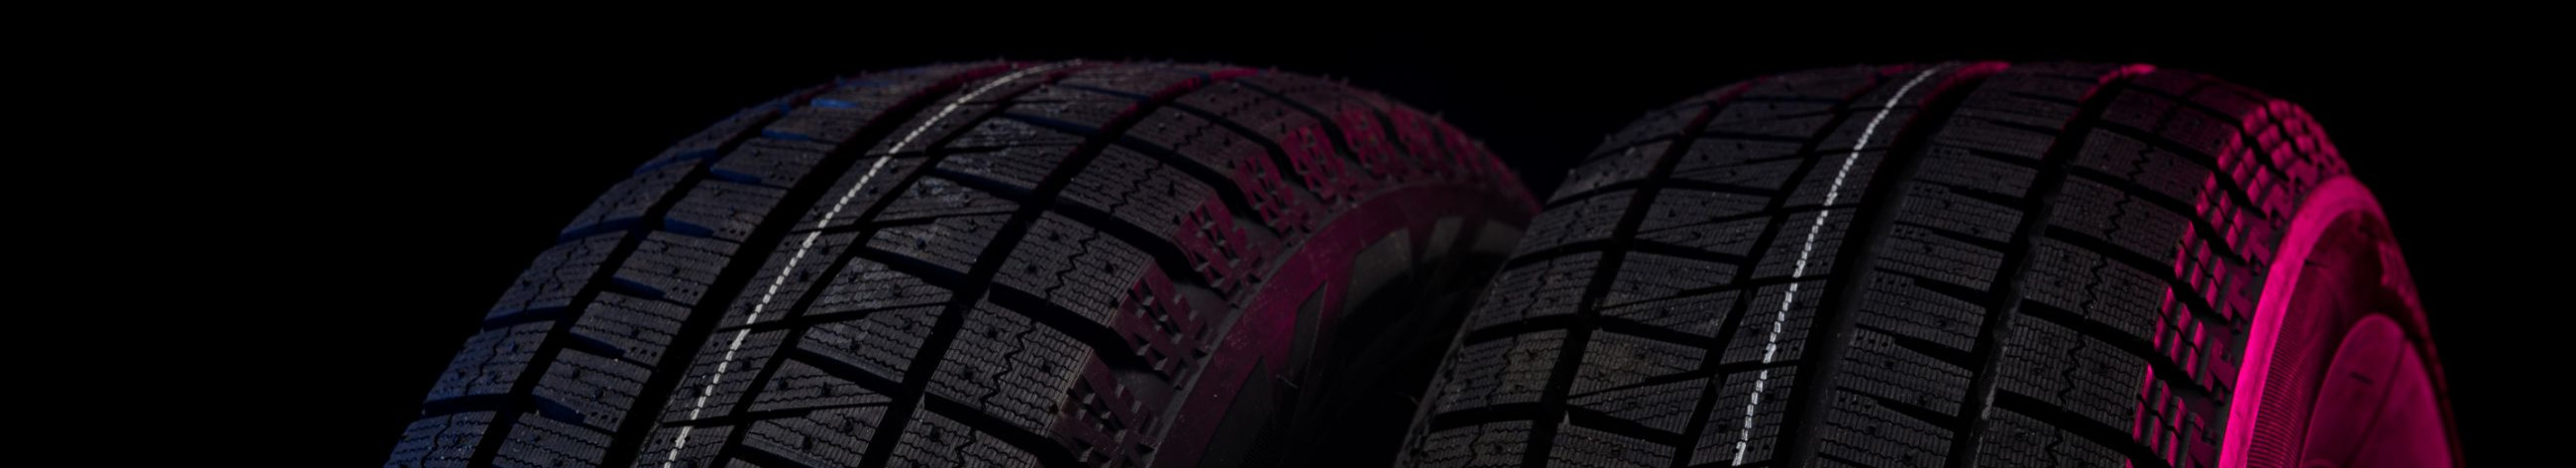 We offer comprehensive tire and vehicle maintenance services.